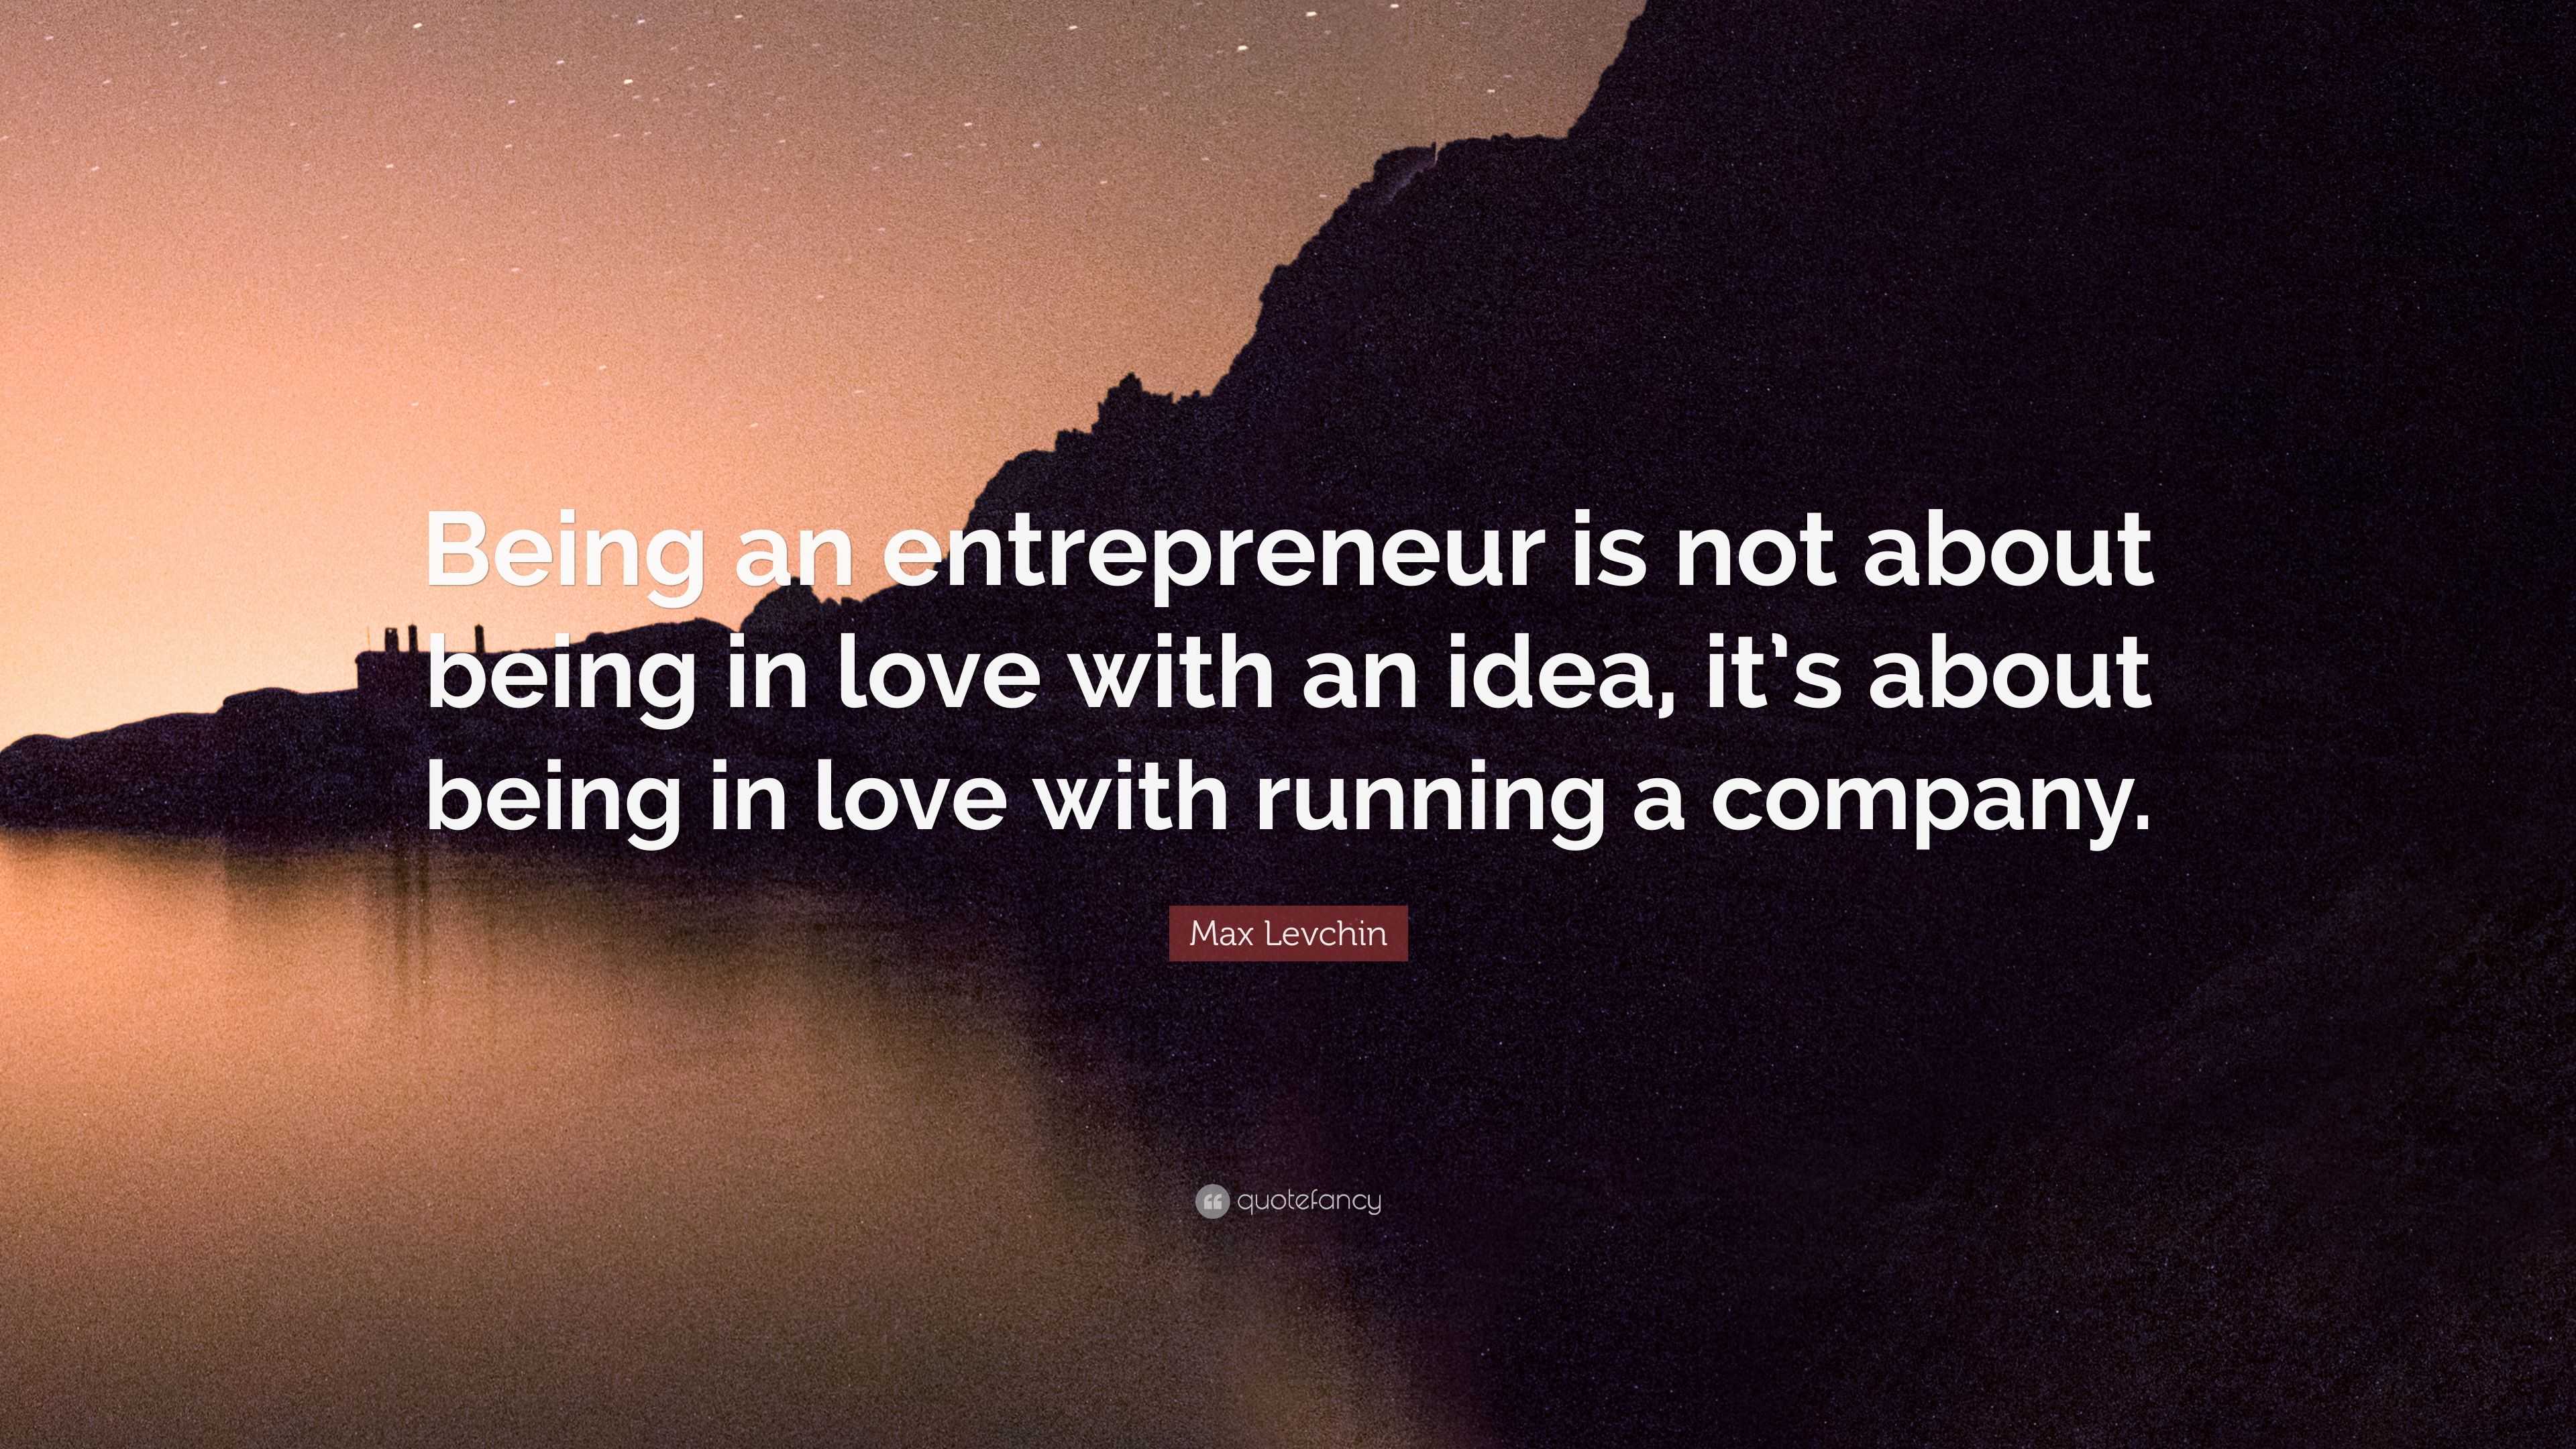 Max Levchin Quote: “Being an entrepreneur is not about being in love